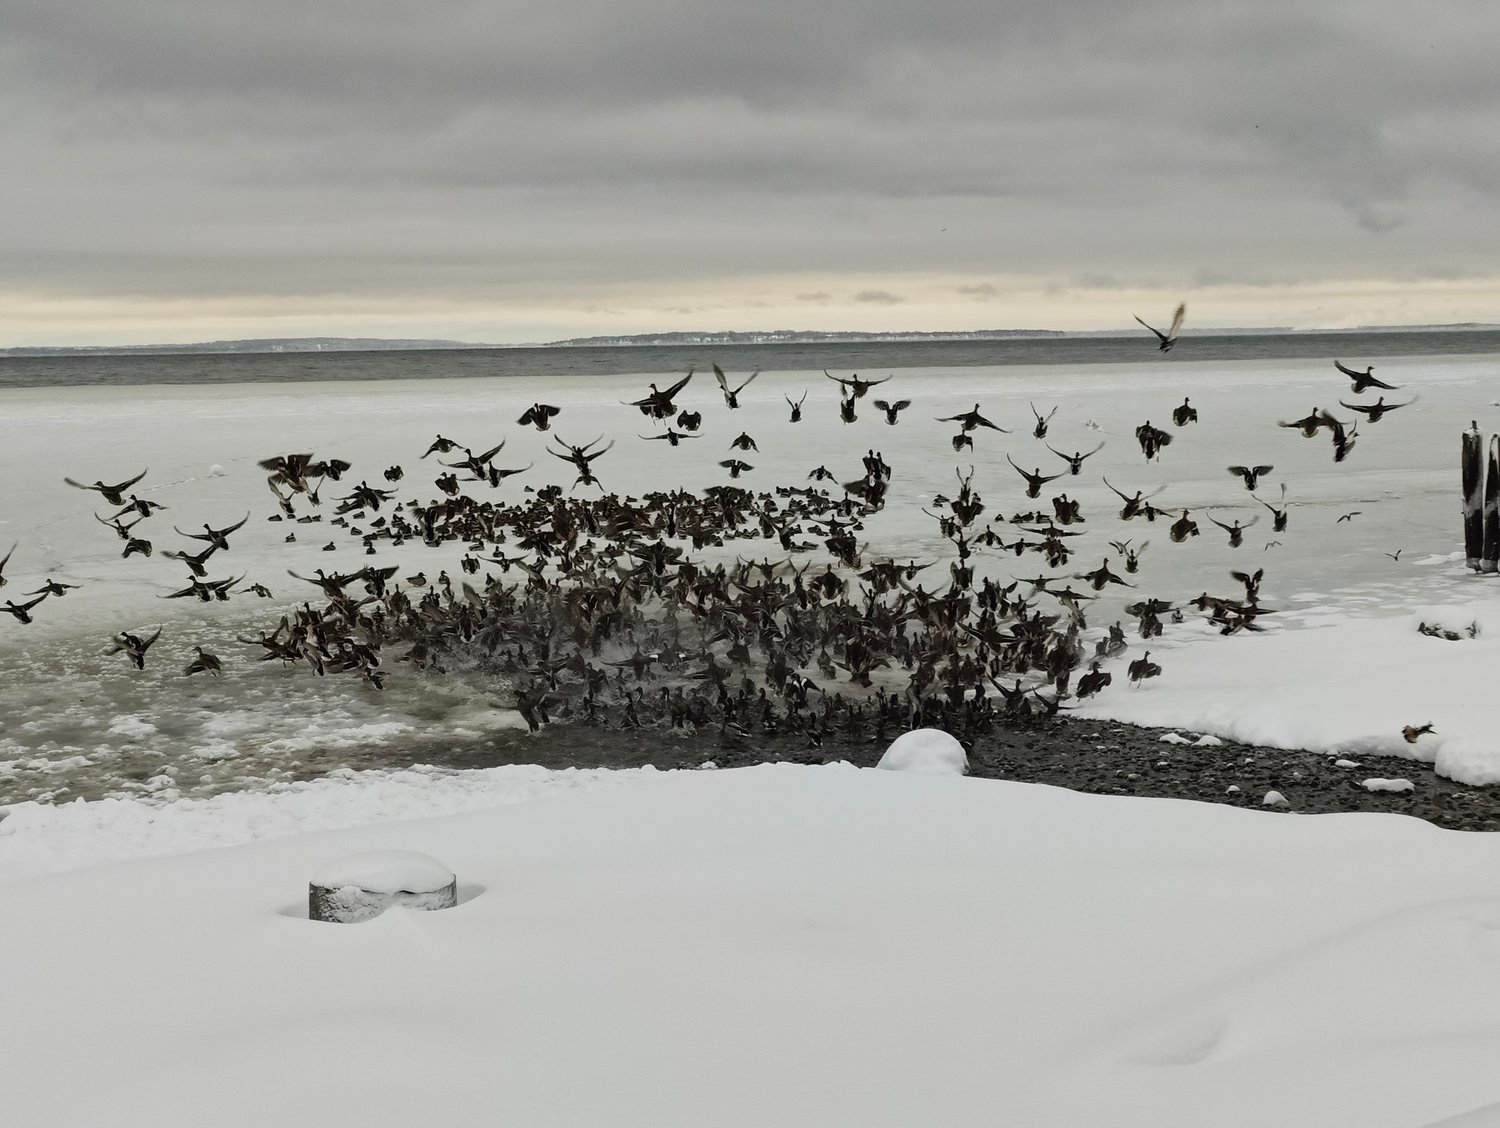 Seabirds gathered at the fresh water outfall on Maple Beach.